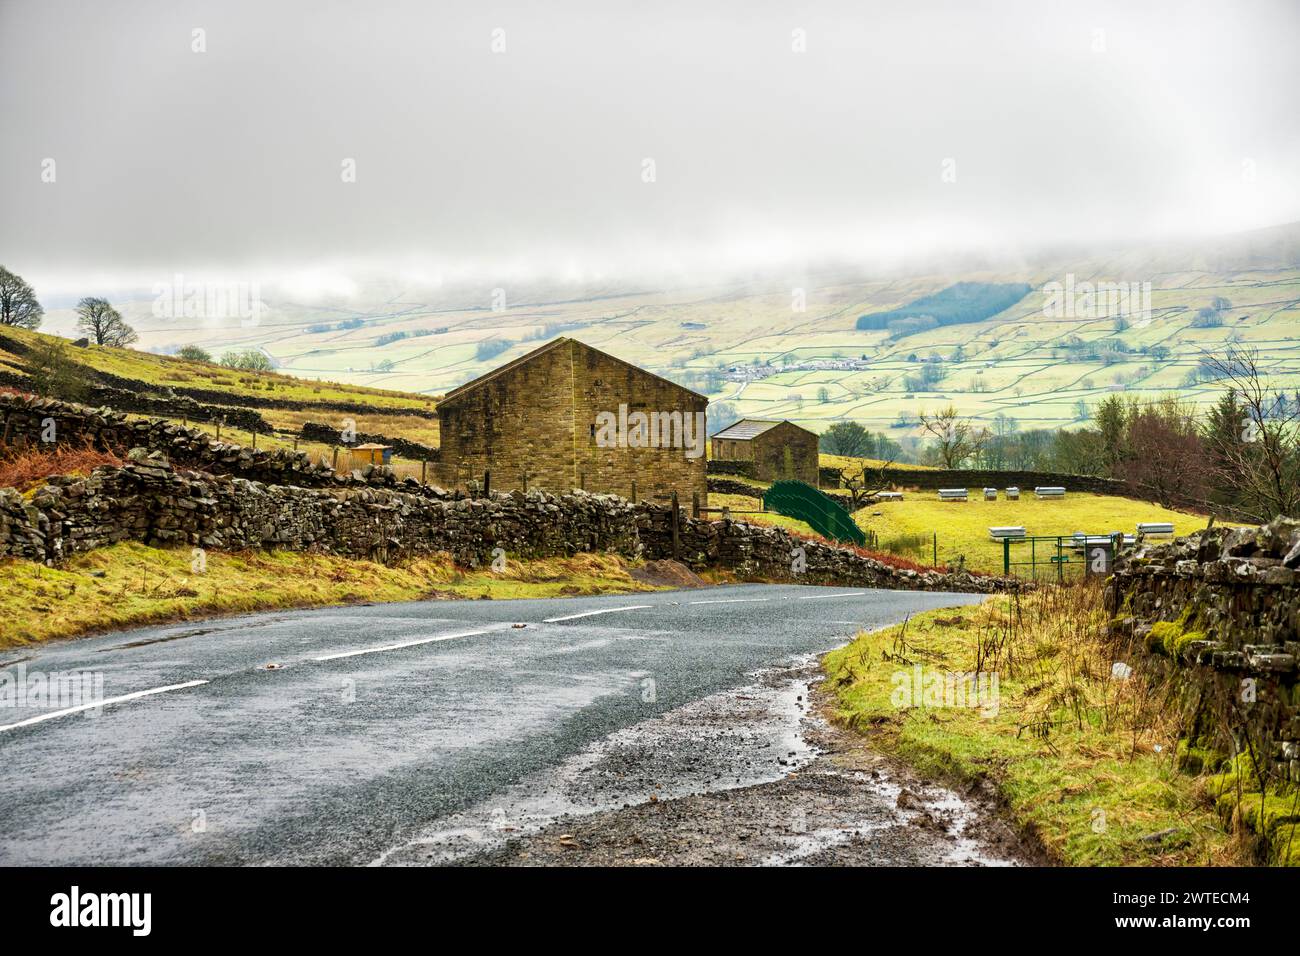 Swaledale stone barns and green fields on a misty winter morning. The Coast to Coast long distance footpath follows the Yorkshire valley. Stock Photo